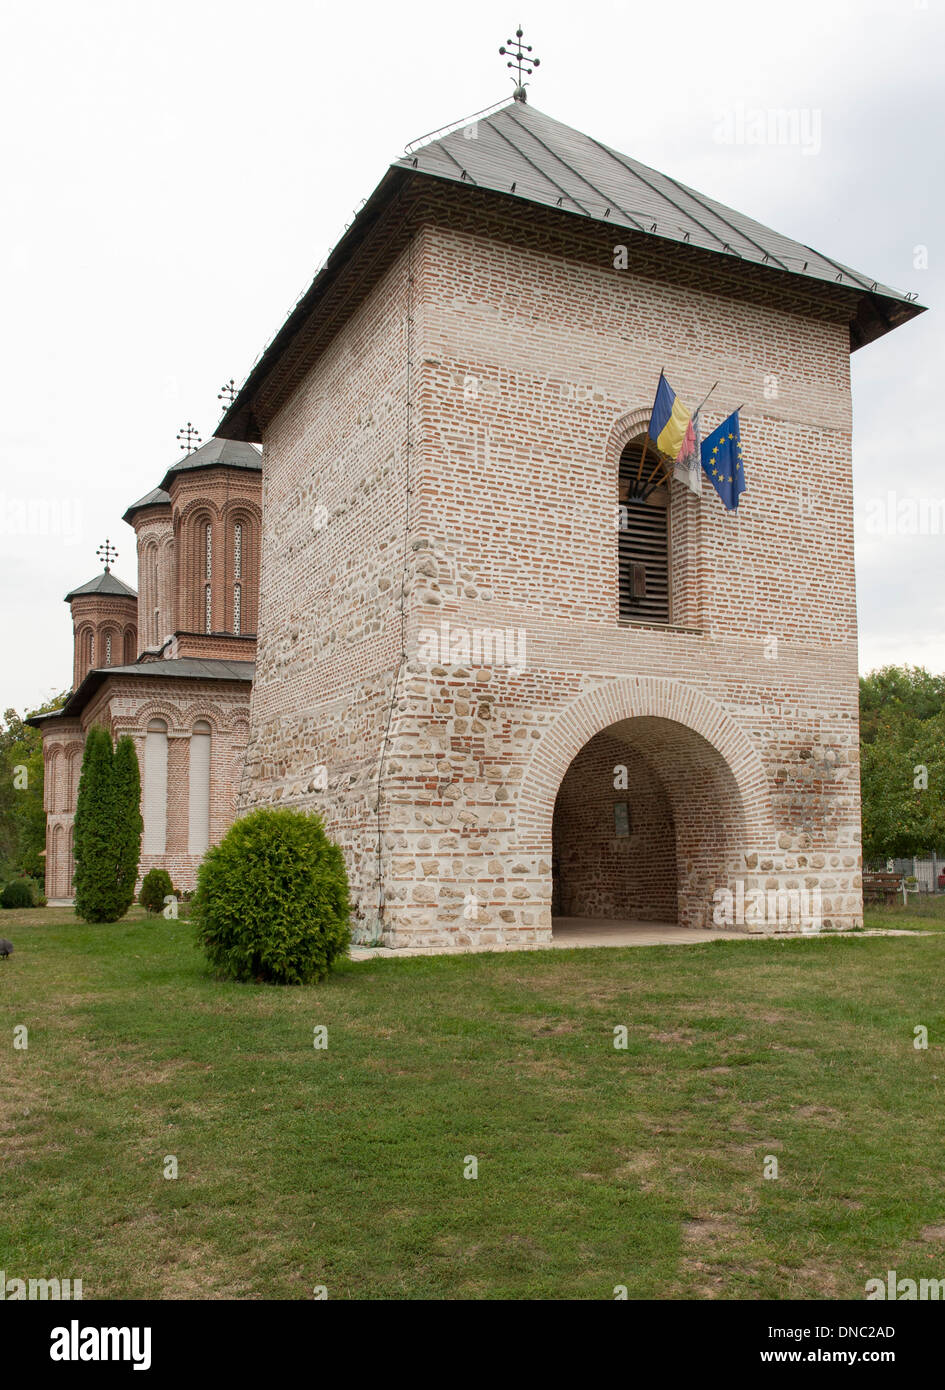 Snagov Monastery in Romania where the remains of Vlad the Impaler (aka Dracula) are said to lie. Stock Photo